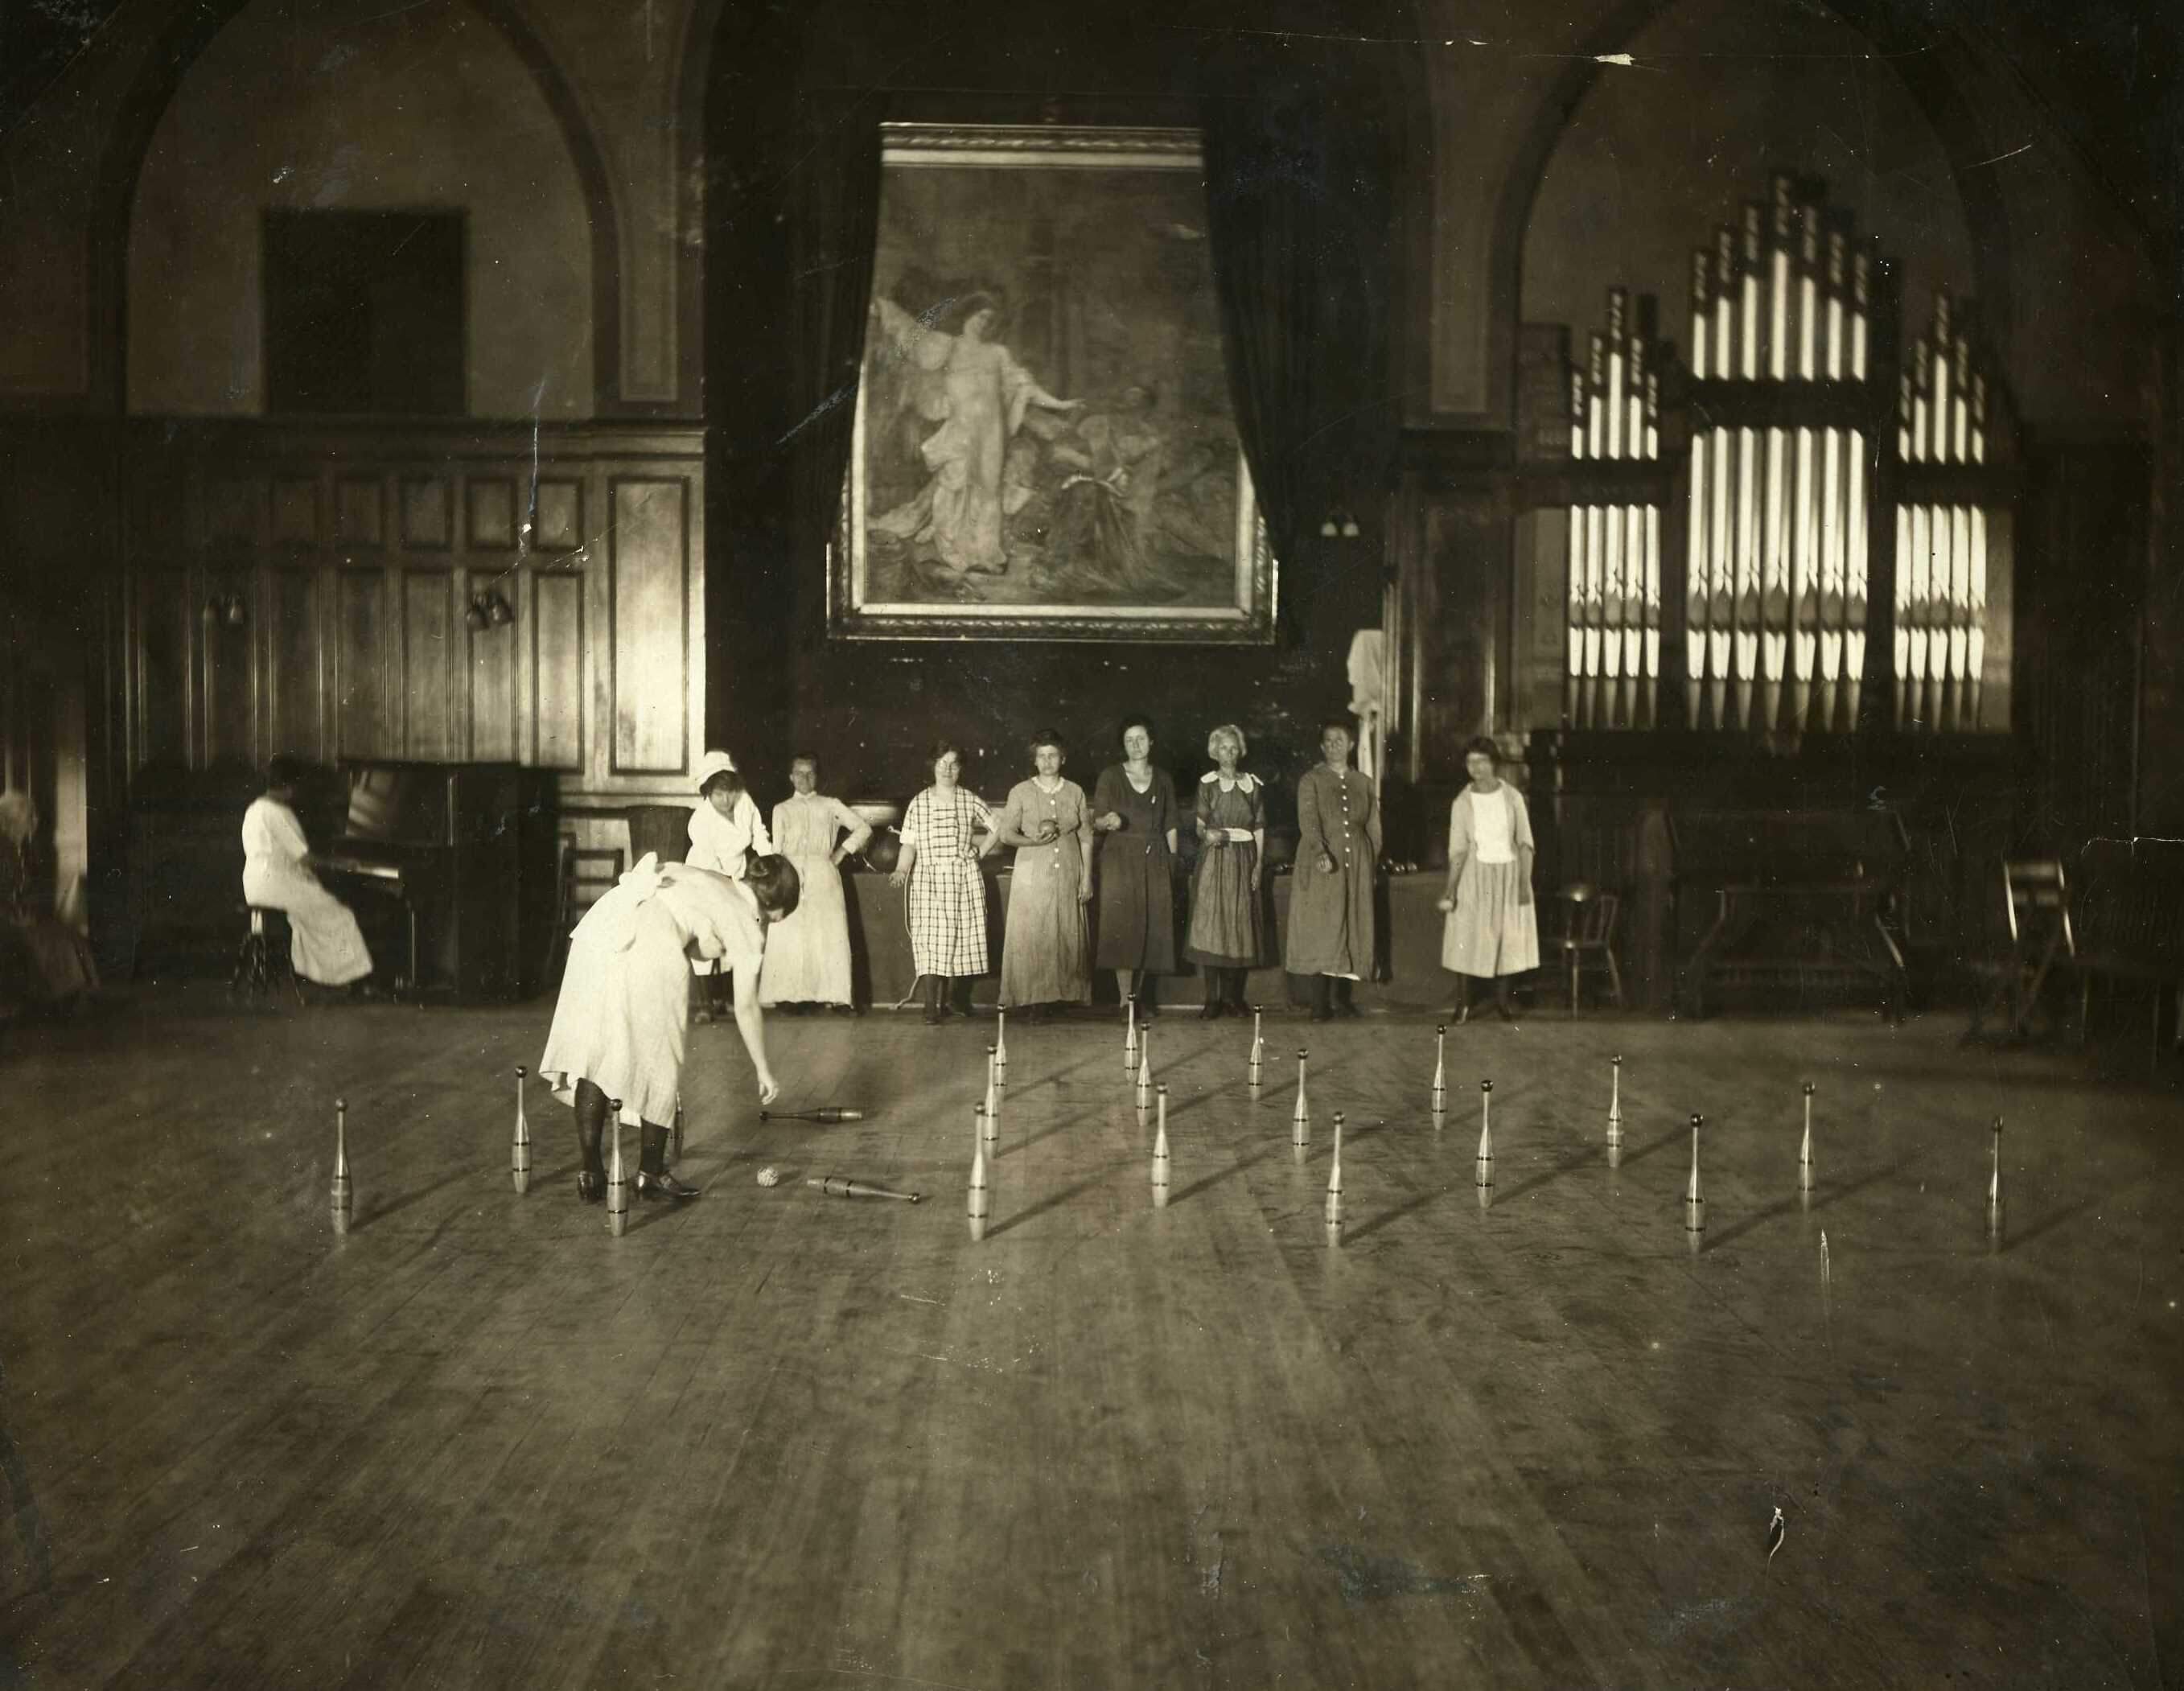 Candlepin bowling in the chapel of Worcester State Hospital, c. 1900. (Photo courtesy of the Worcester Historical Museum.)